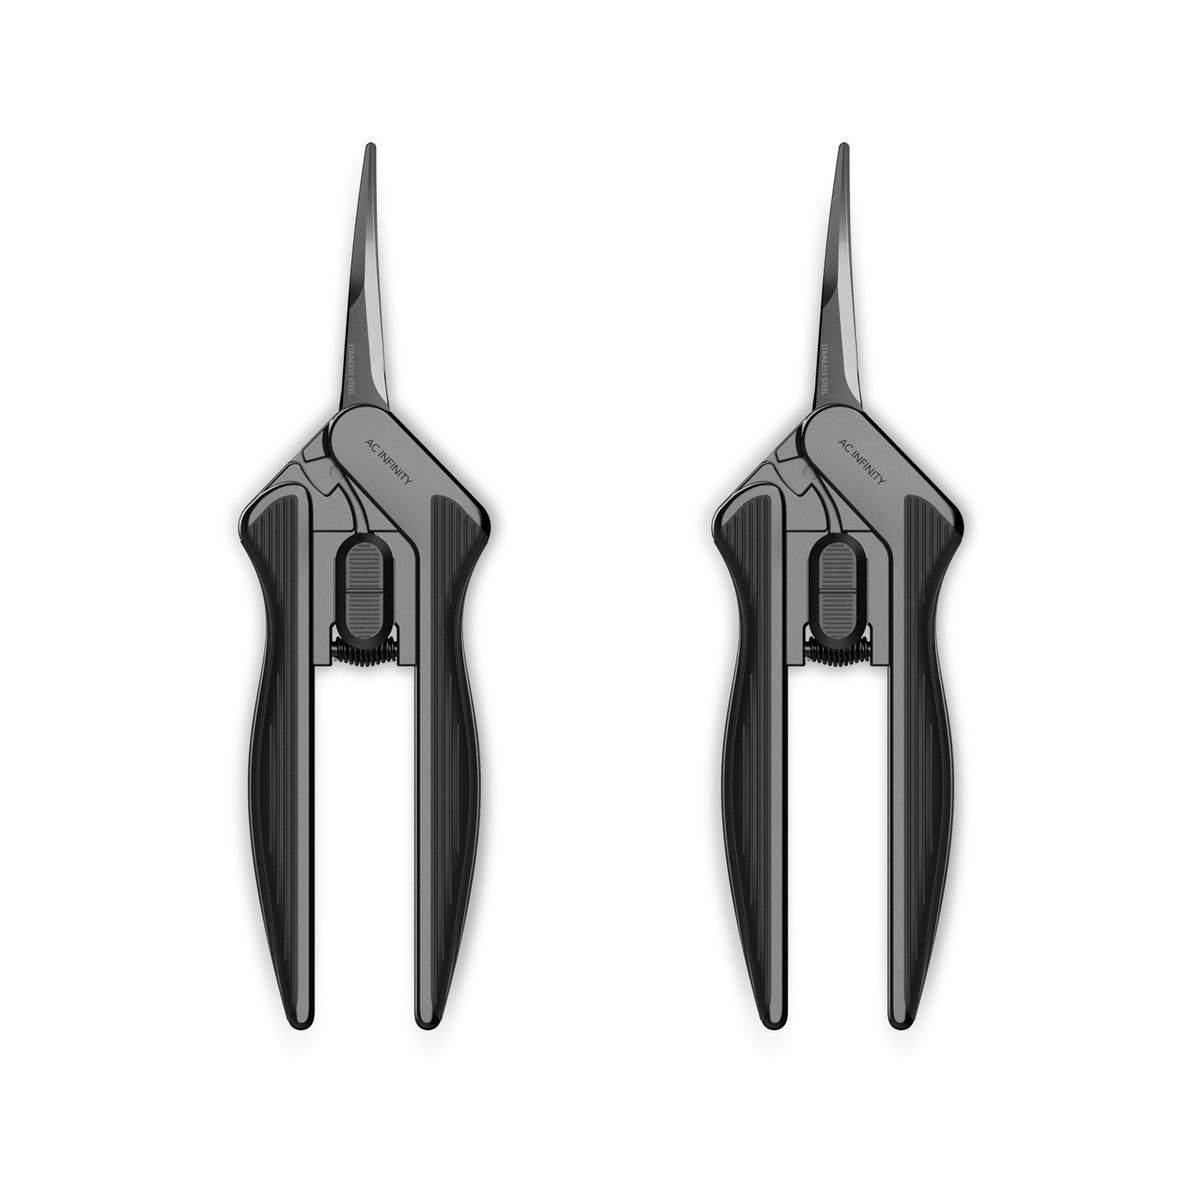 AC Infinity AC Infinity Stainless Steel Curved Pruning Shear Trimming Scissors - 2-Pack Main